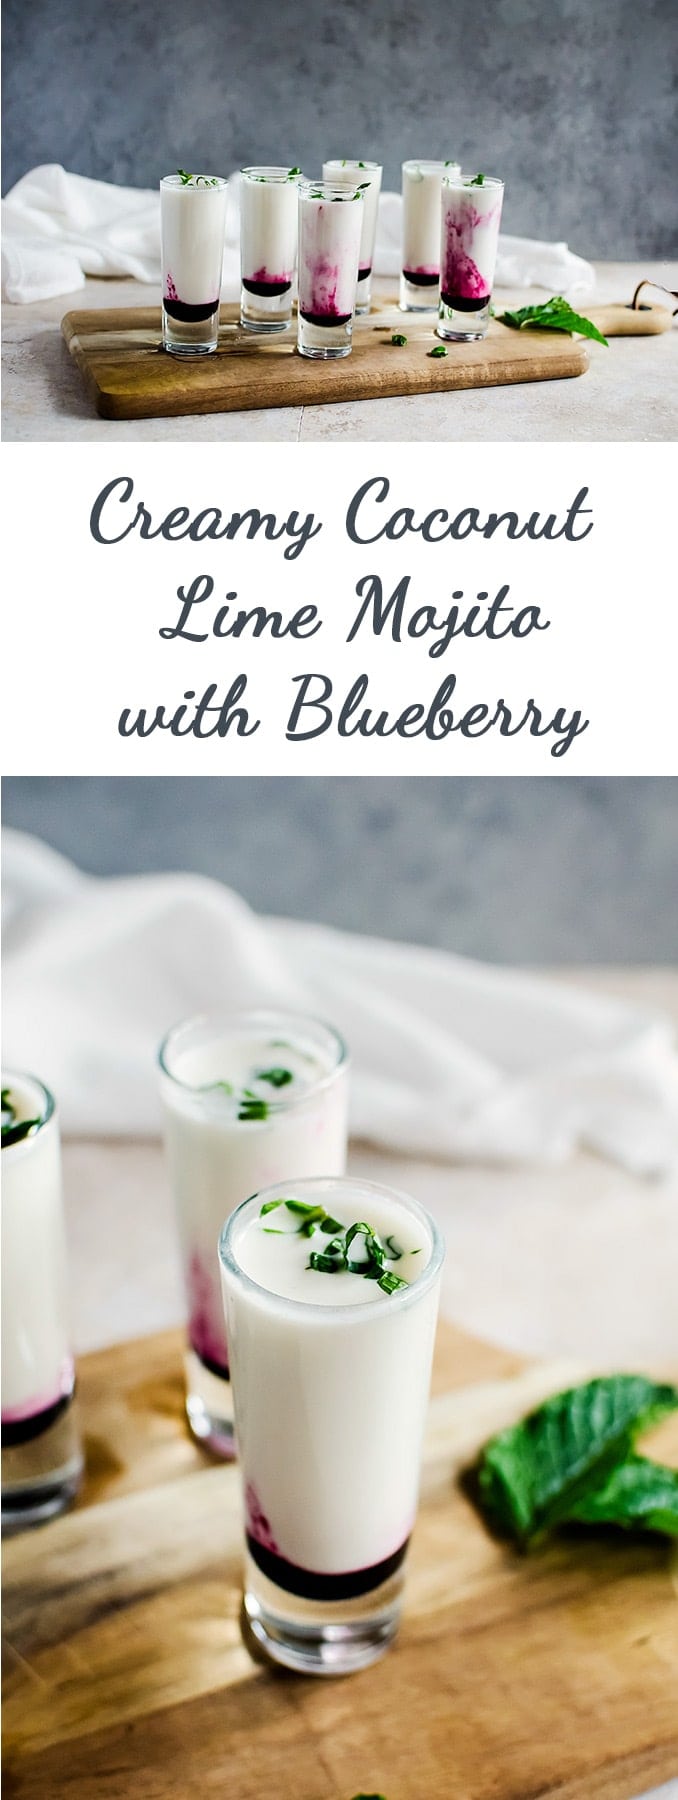 These creamy coconut lime mojito shooters with a hit of blueberry are your new tropical getaway.